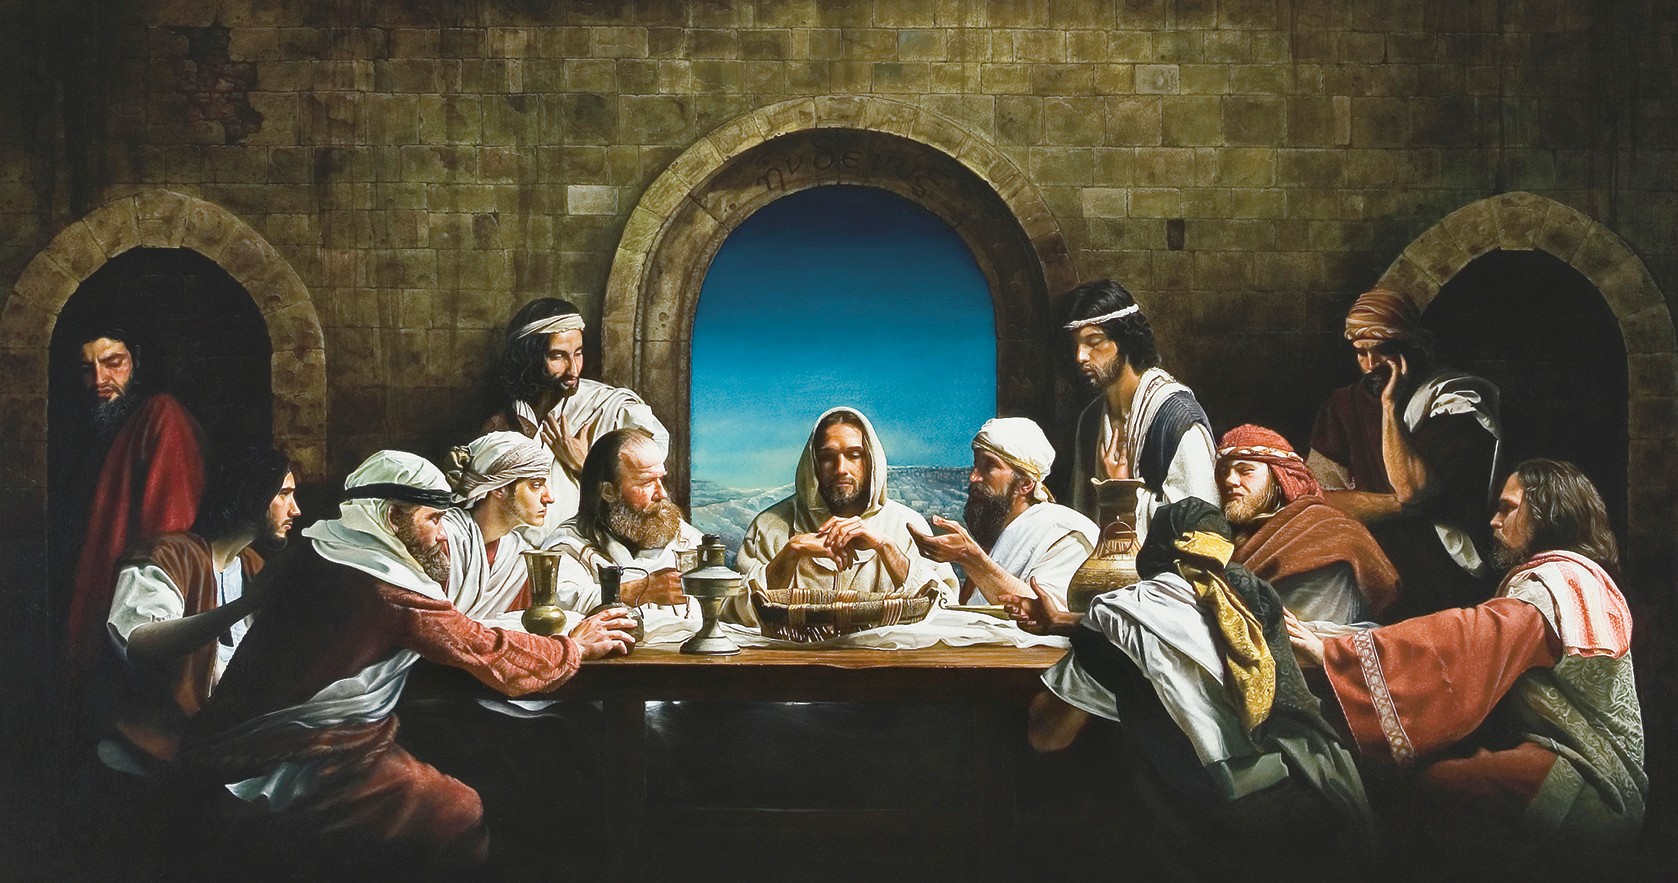 Painting depicting Jesus Christ and his apostles during the last supper.  Christ is depicted breaking bread and instituting the sacrament.